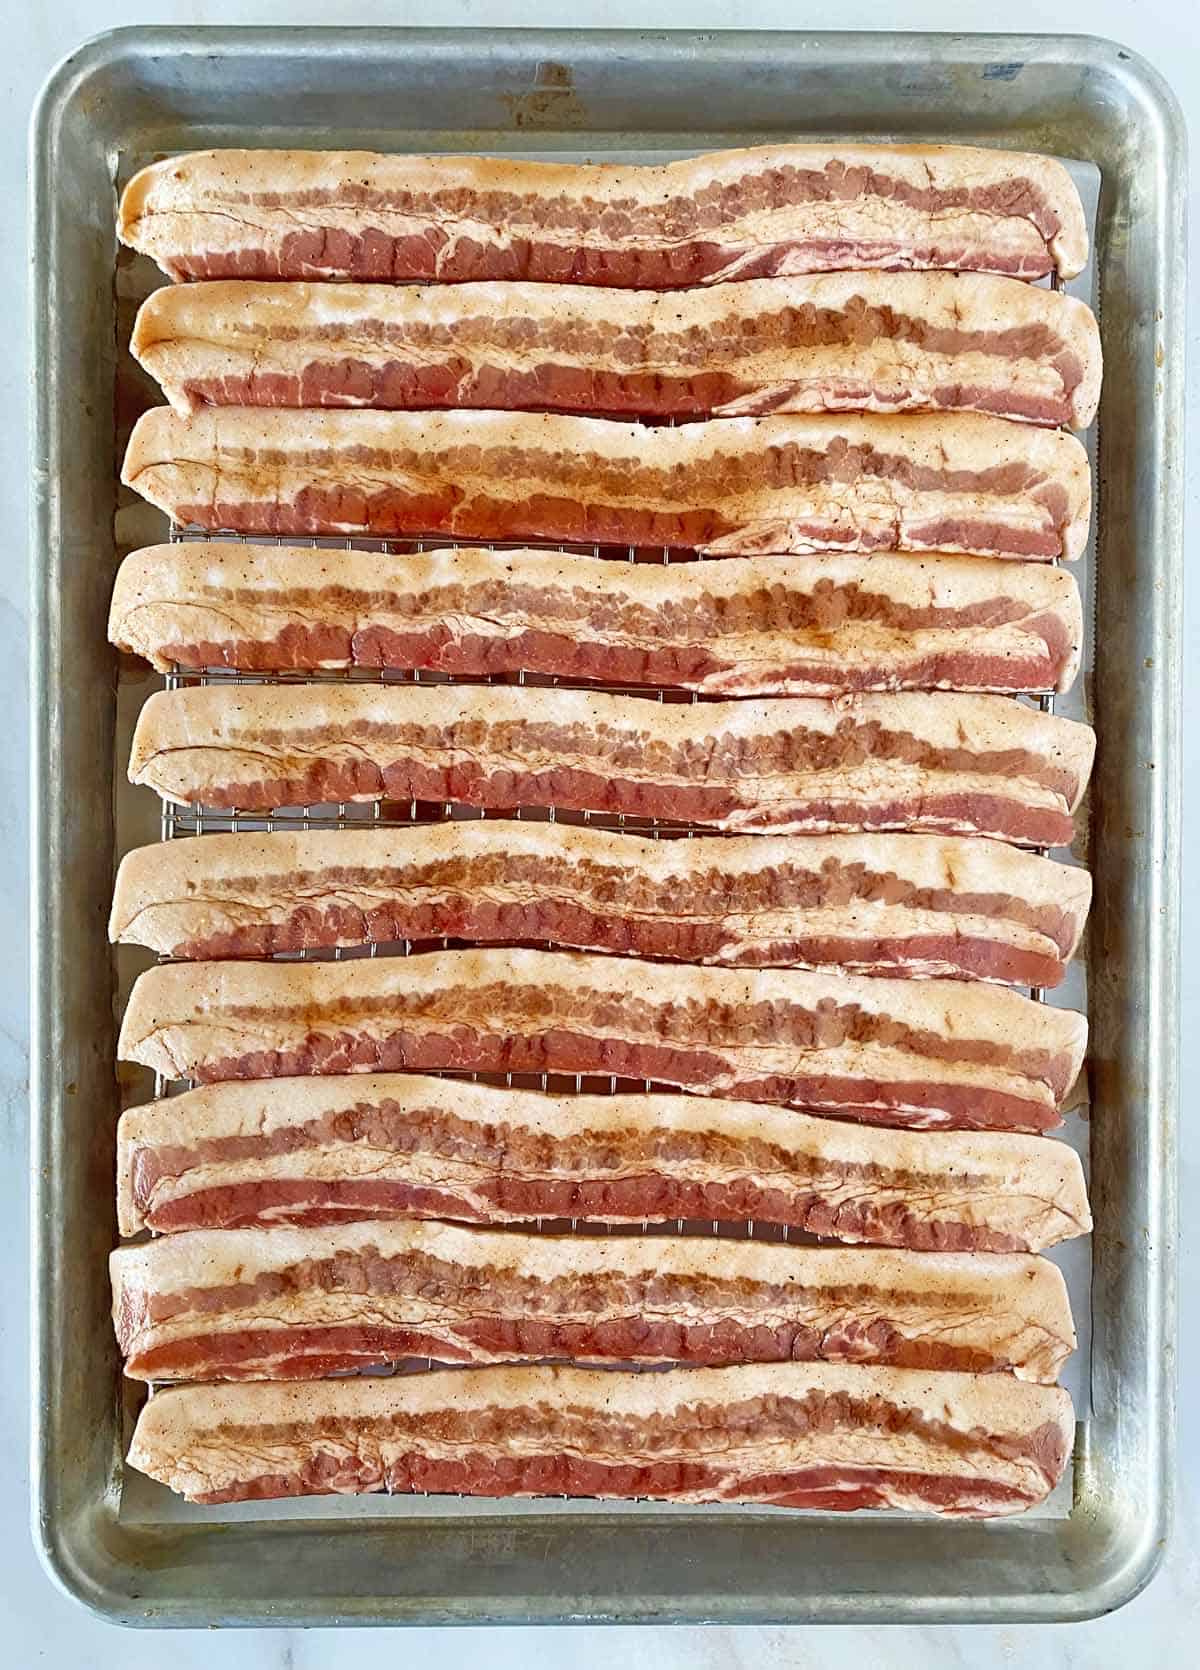 10 strips of uncooked million dollar bacon covered with glaze and ready to be baked in the oven.